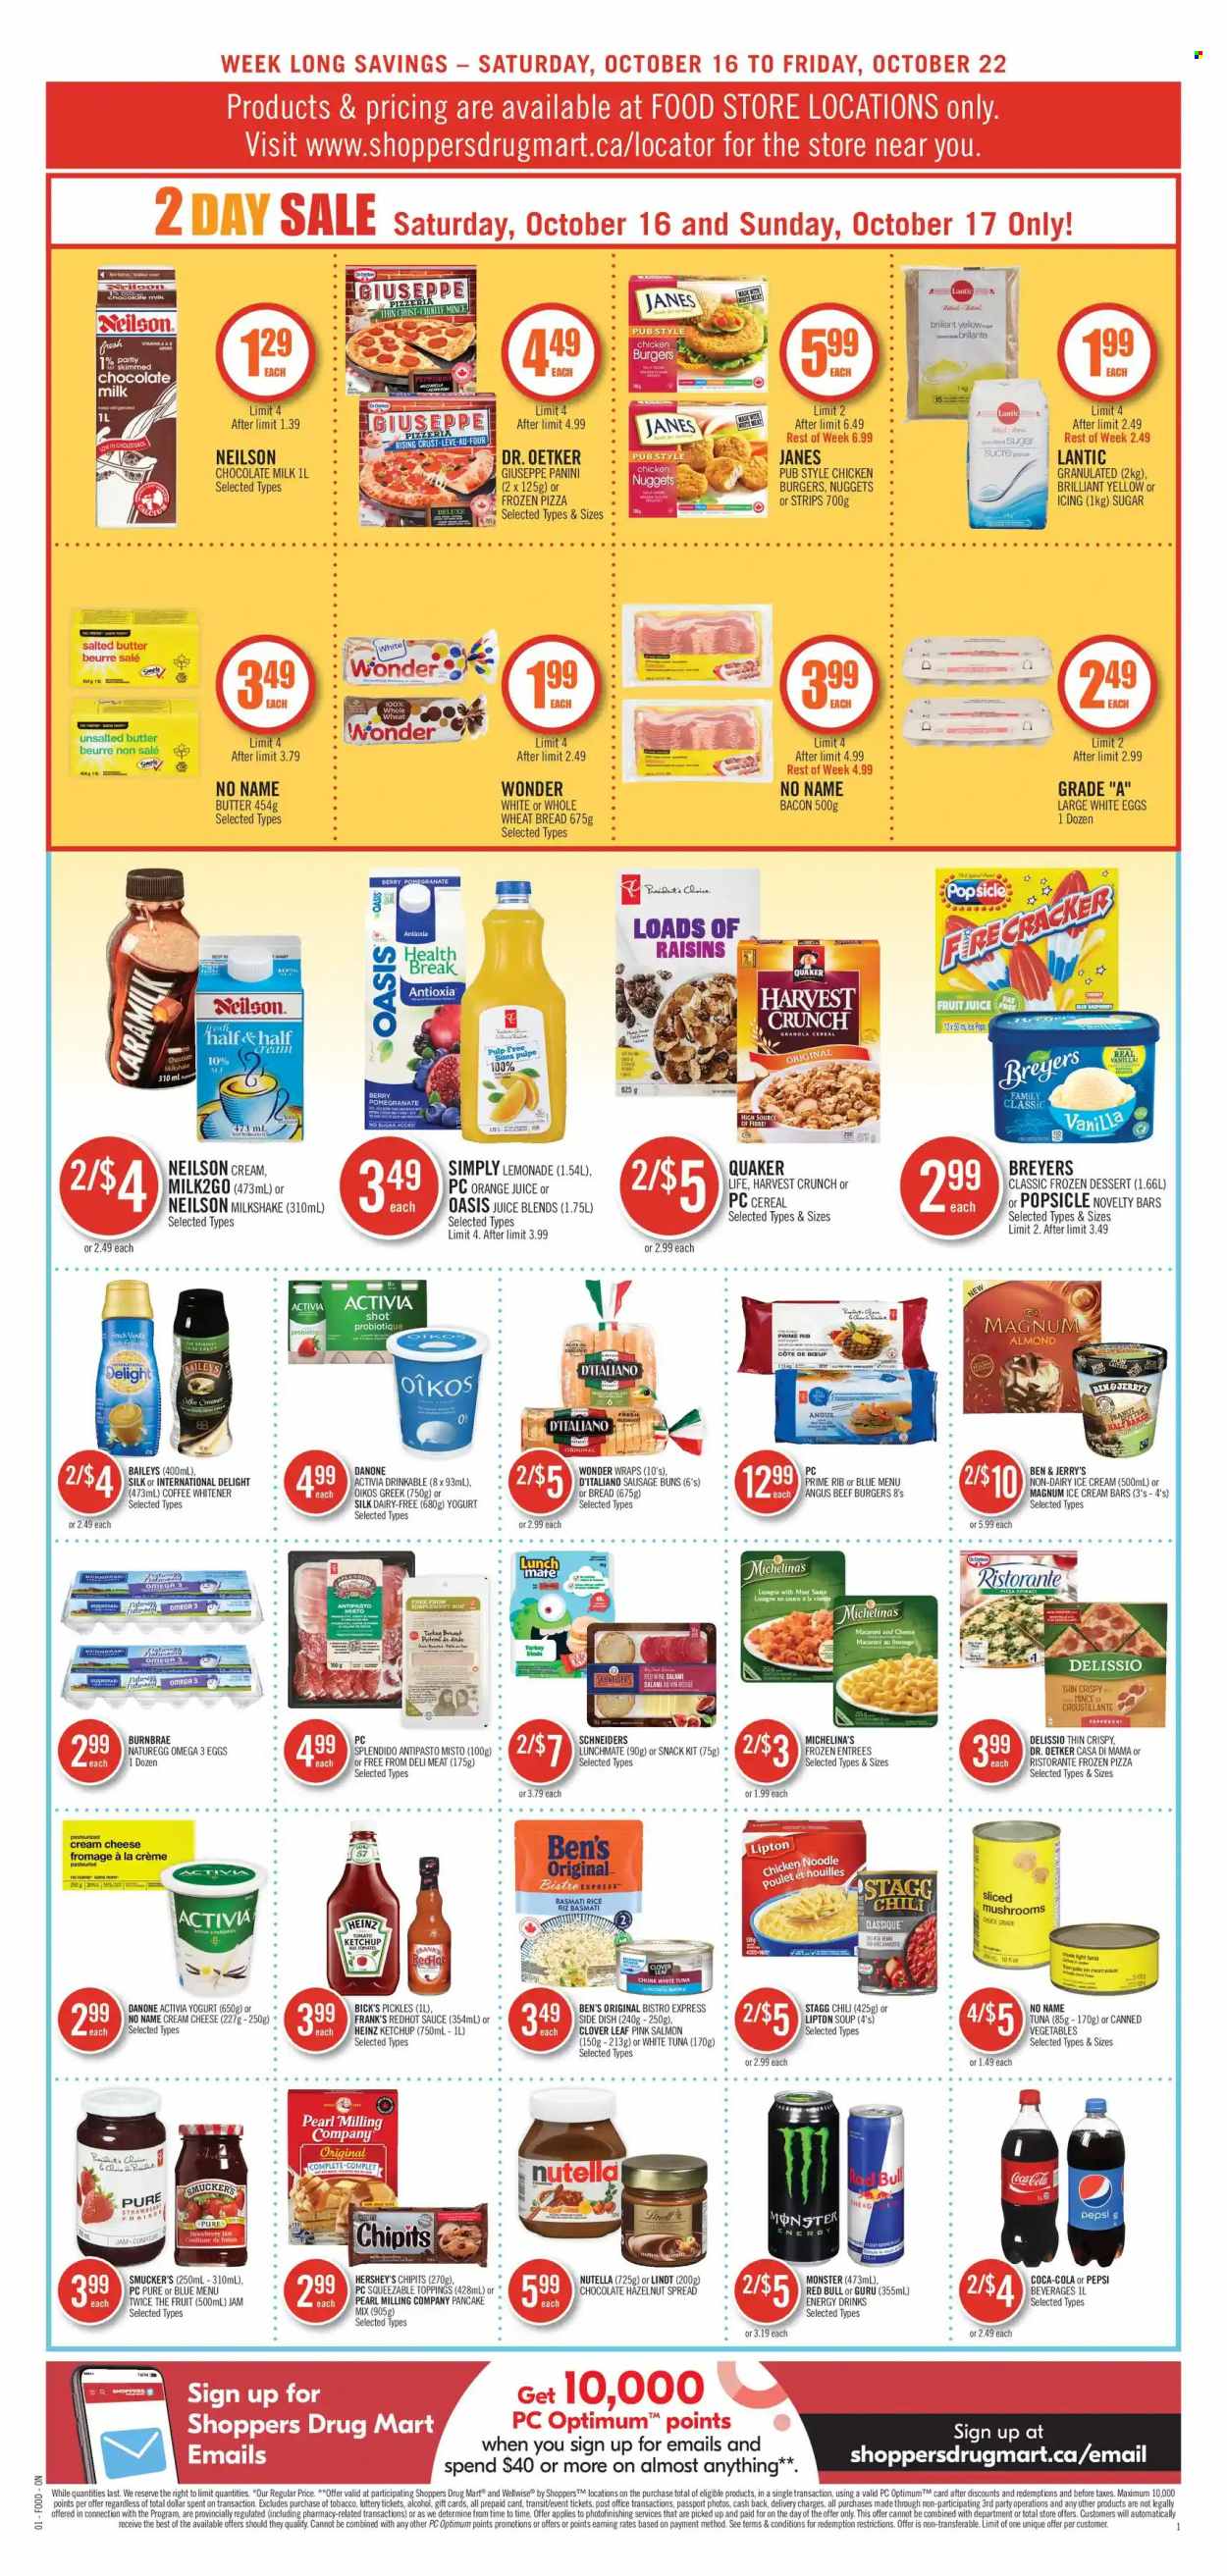 thumbnail - Shoppers Drug Mart Flyer - October 16, 2021 - October 22, 2021 - Sales products - milk chocolate, Hershey's, cream cheese, pancakes, Dr. Oetker, salmon, strawberry jam, tuna, Heinz, pickles, soup, canned vegetables, sauce, cereals, Quaker, noodles, fruit jam, hazelnut spread, dried fruit, Coca-Cola, lemonade, Pepsi, orange juice, juice, fruit juice, energy drink, Monster, Clover, Red Bull, coffee, Omega-3, alcohol, granola, raisins, ketchup, Nutella, Lipton, Lindt. Page 6.